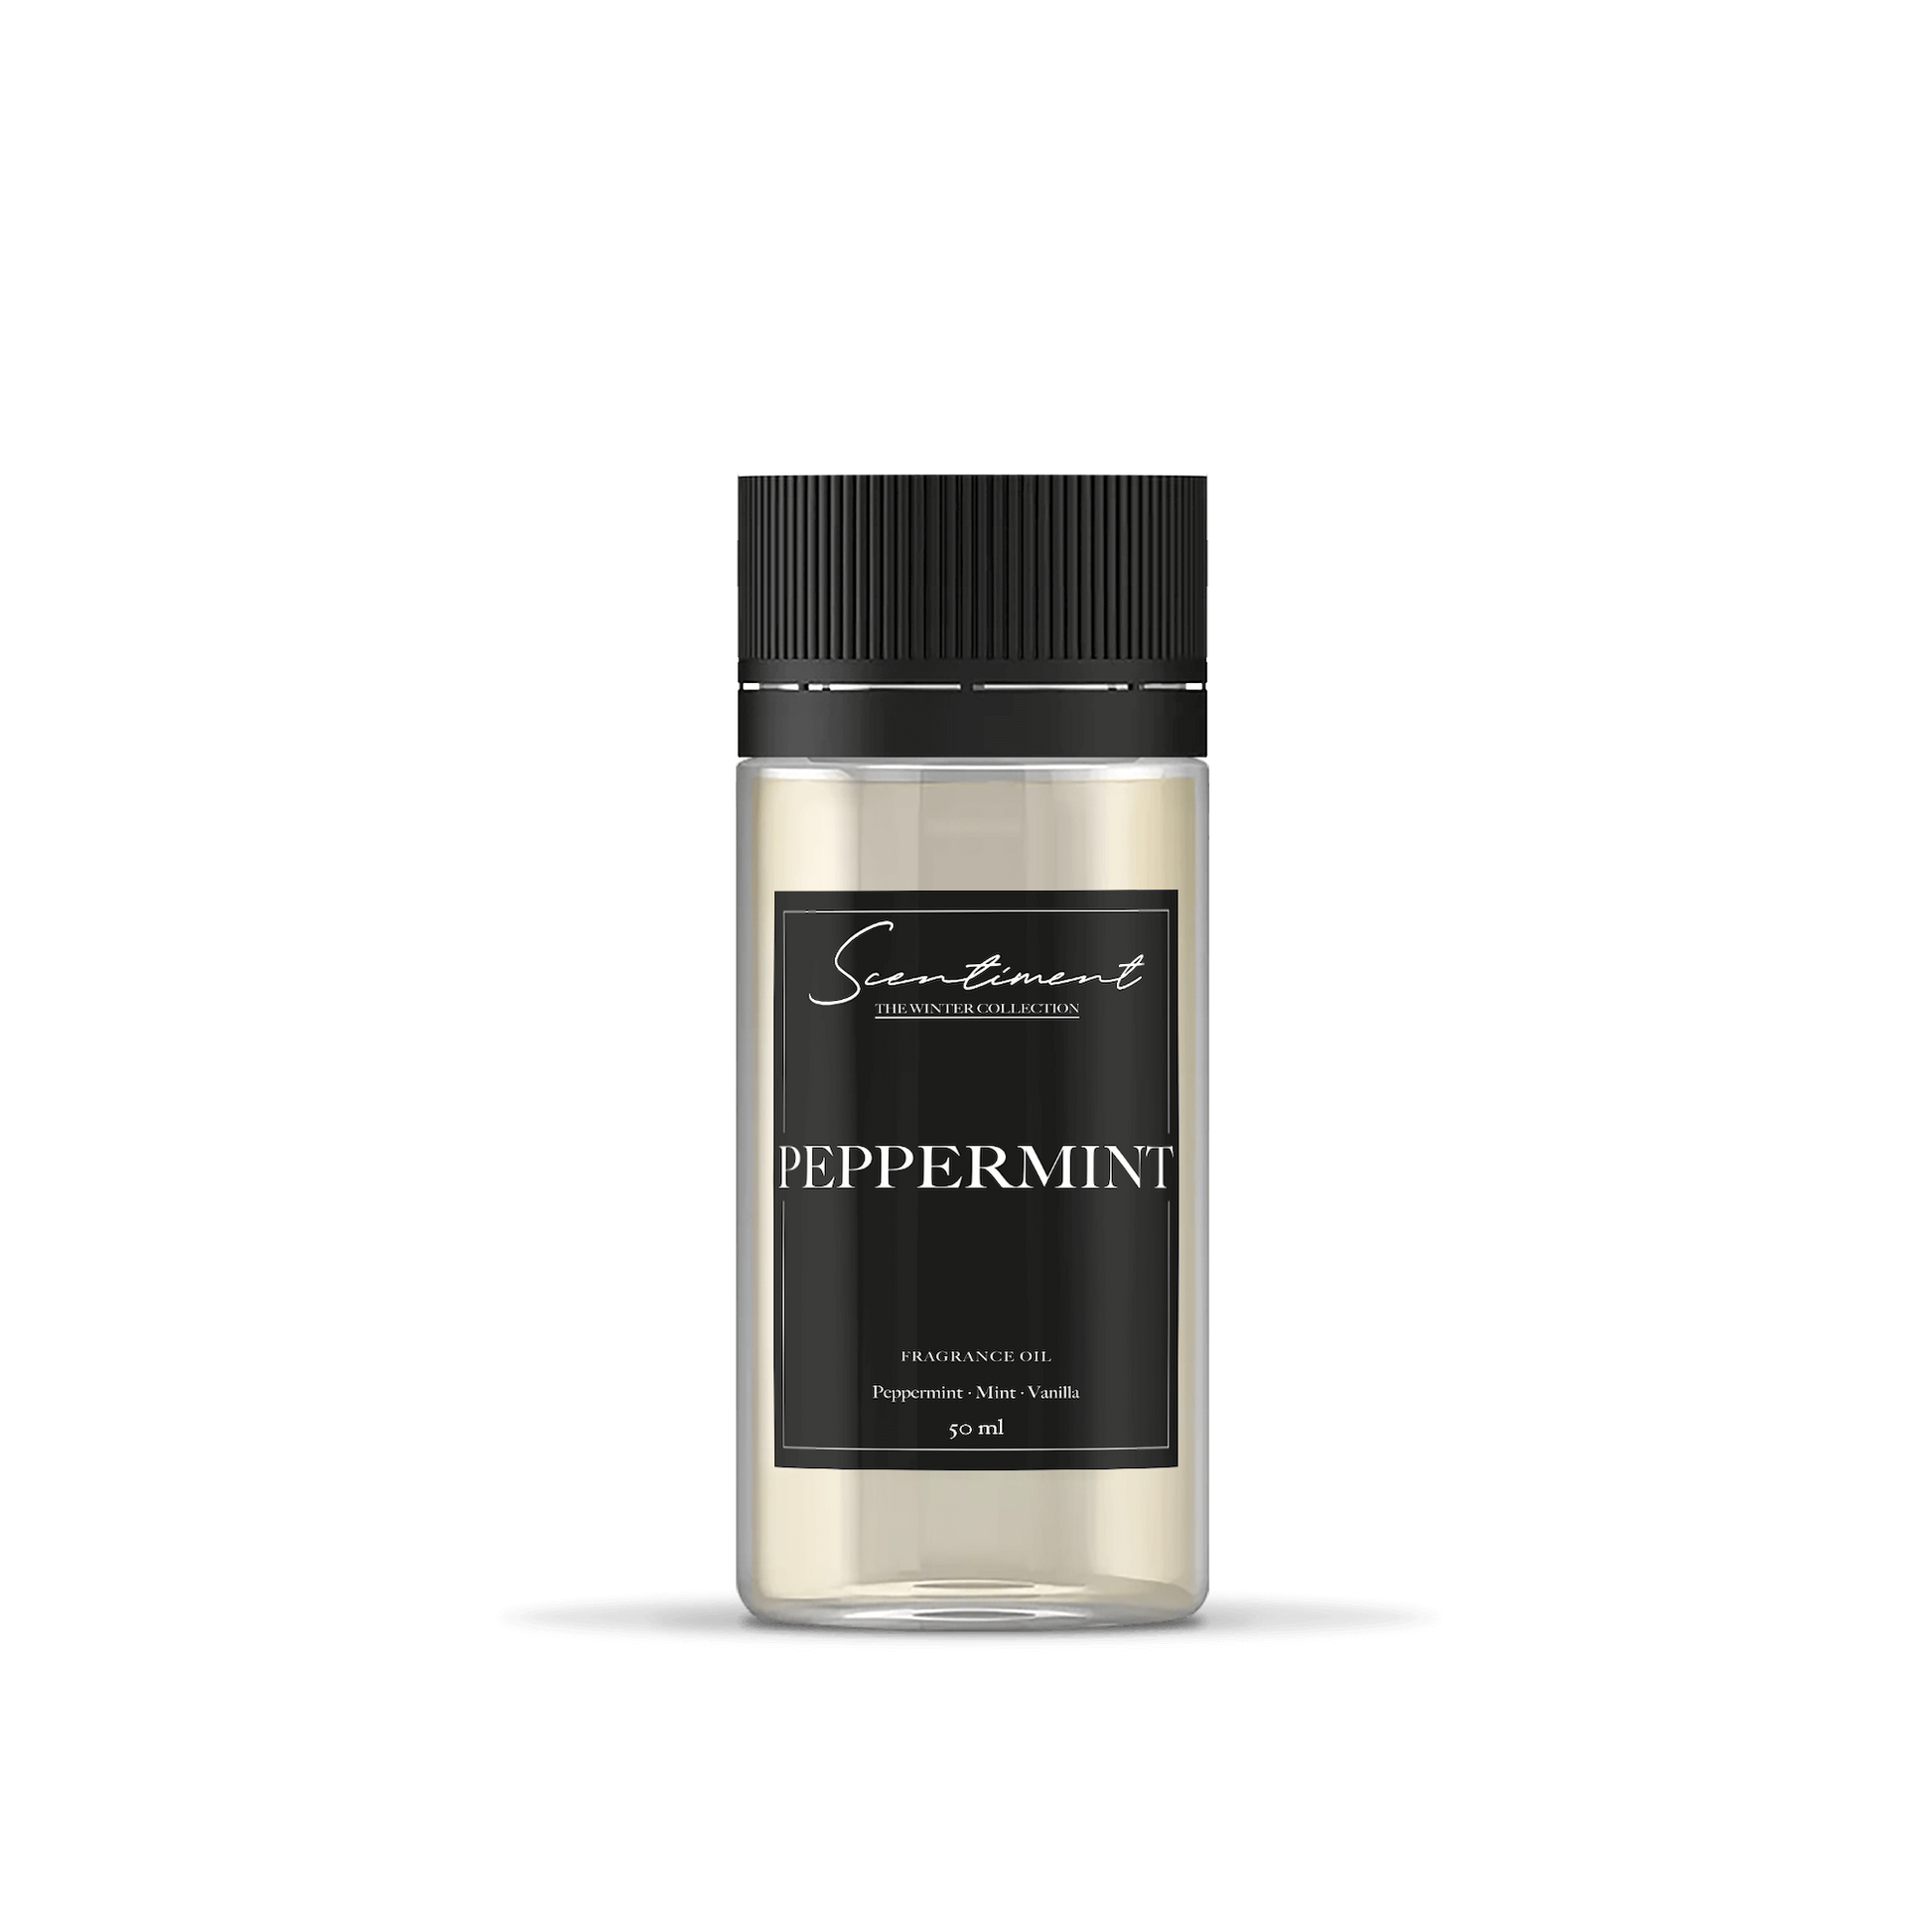 Peppermint Fragrance Oil with notes of Peppermint, Mint, and Vanilla.